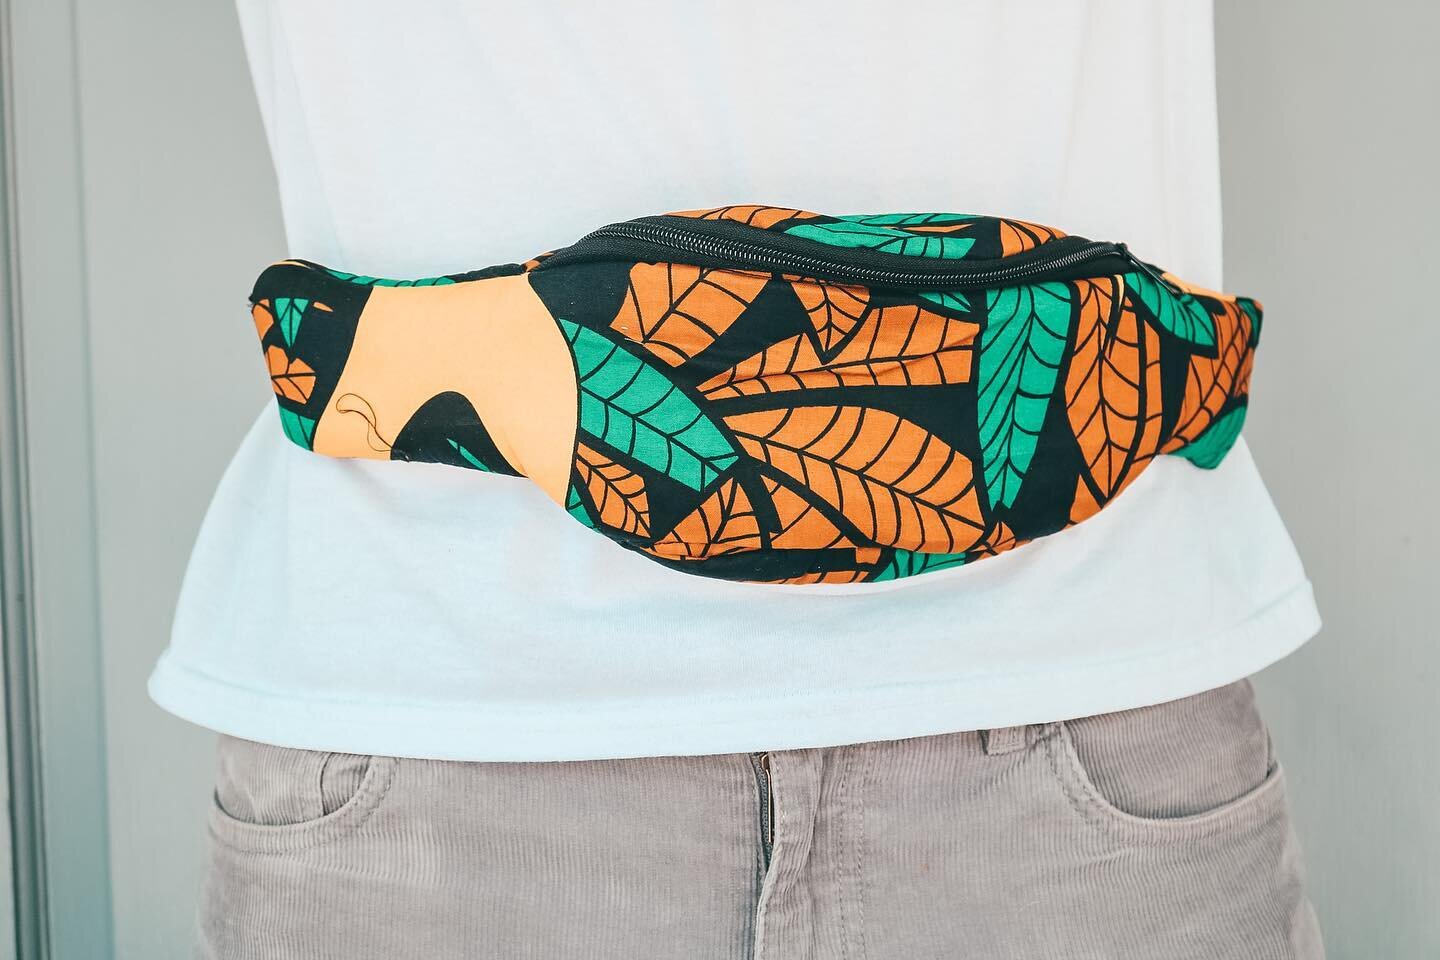 some 🔥 new prints for our Fanny packs. Go check out more on our website!! // #jinjaprints #linkinbio #handmade #africanprints #fannypack #fannypackswag